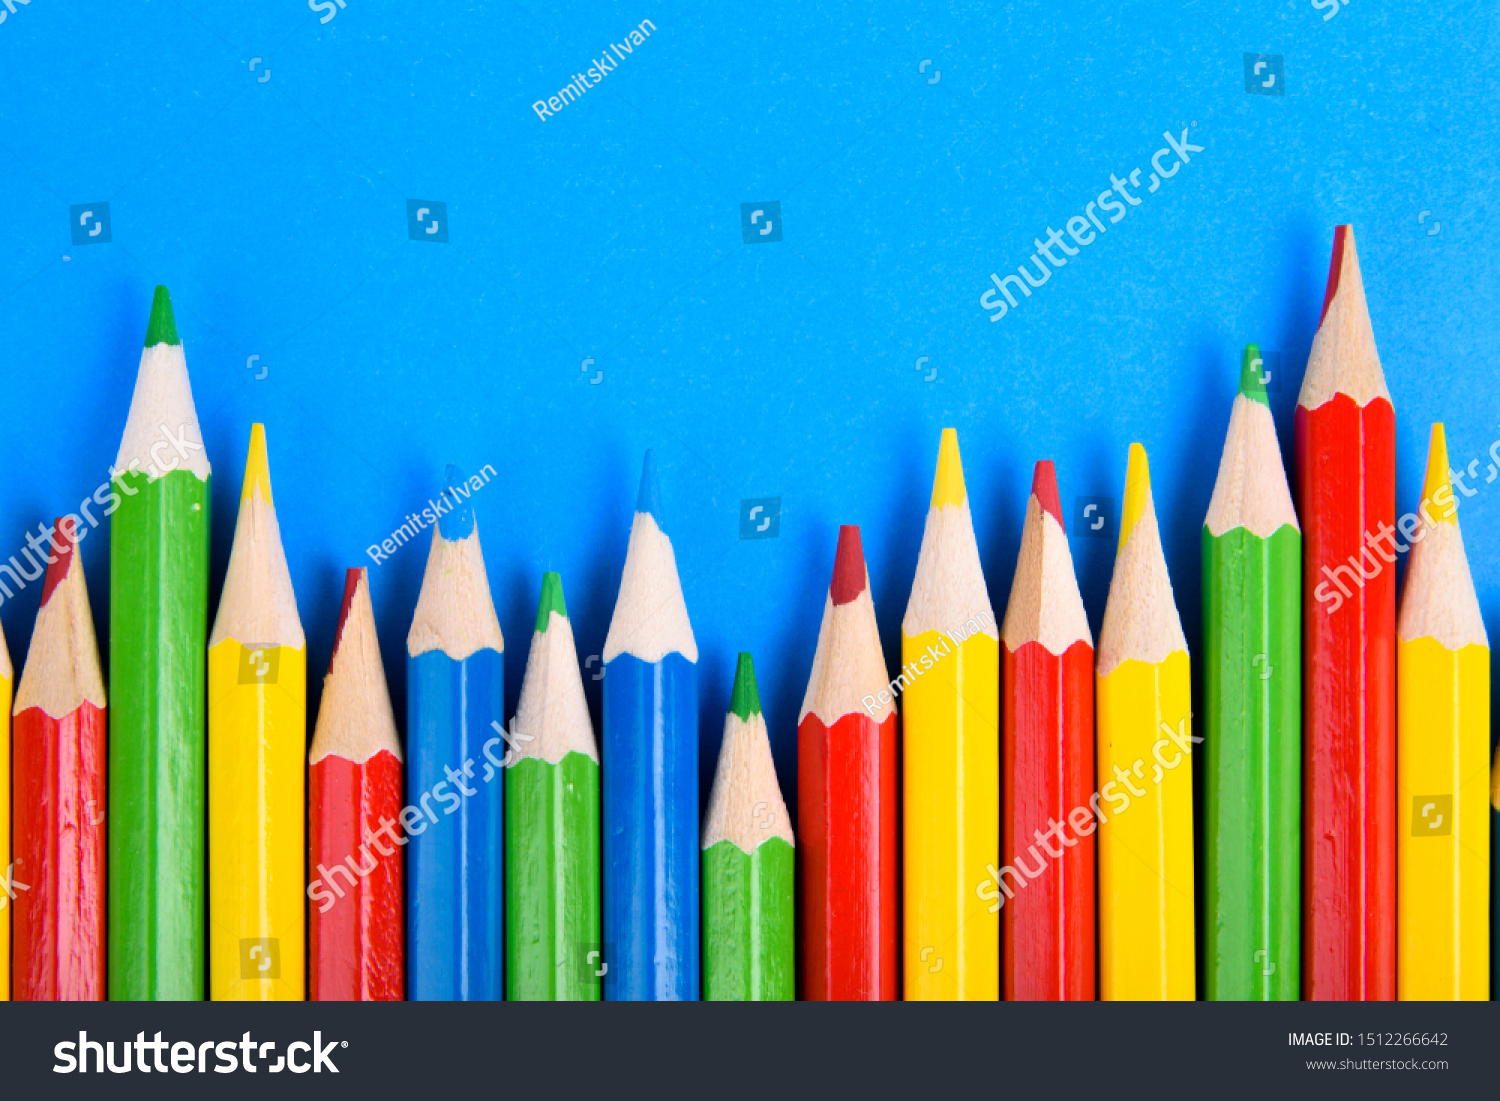 Colored pencils background.Color pencils on blue background.Close up.
Many different colored pencils on blue background.Colorful pencil .Colorfull
 #1512266642